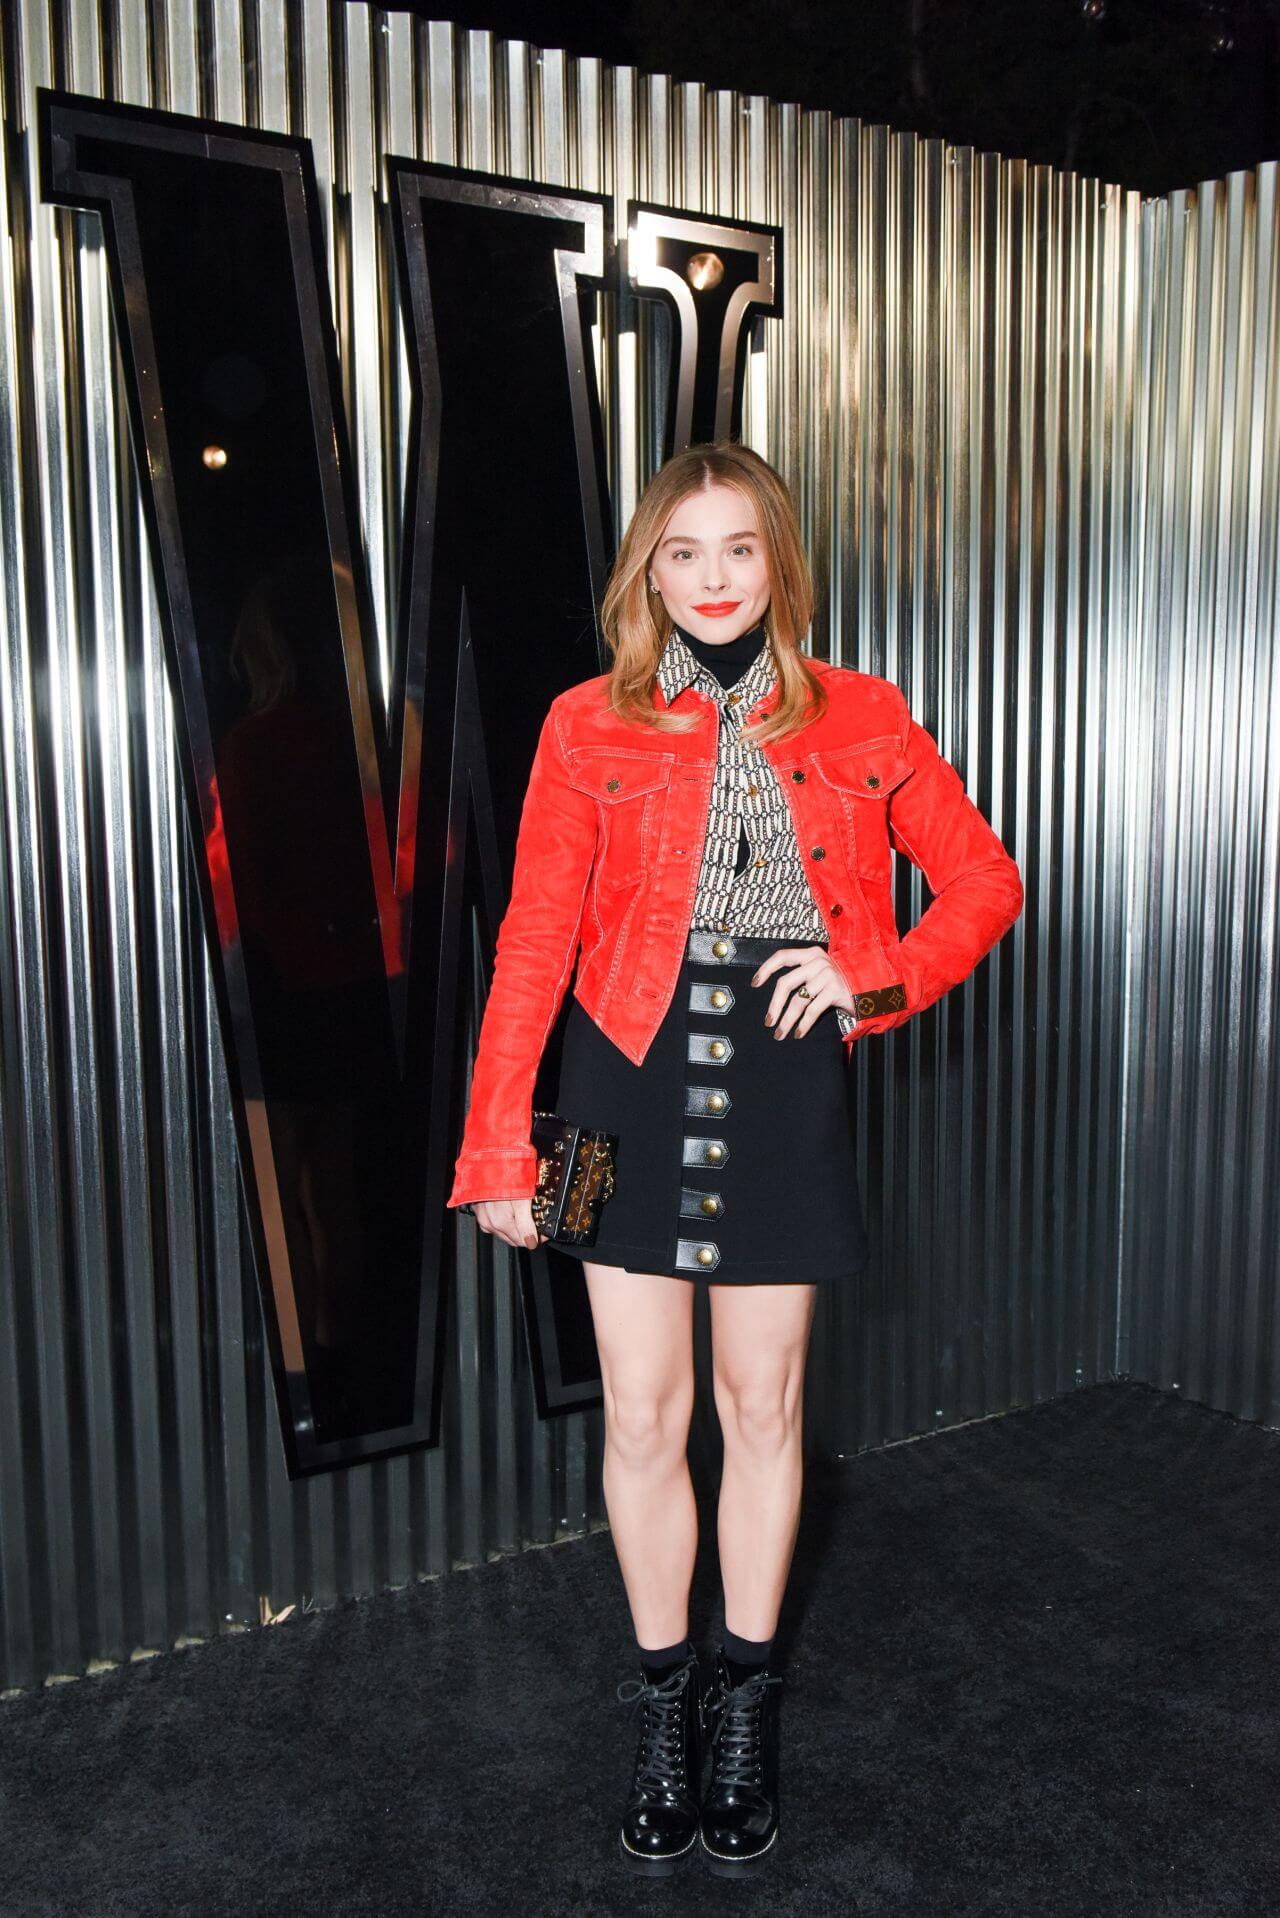 Chloe Moretz  Perfect Looks In Red Jacket Under Printed Shirt With Mini Skirt Outfit